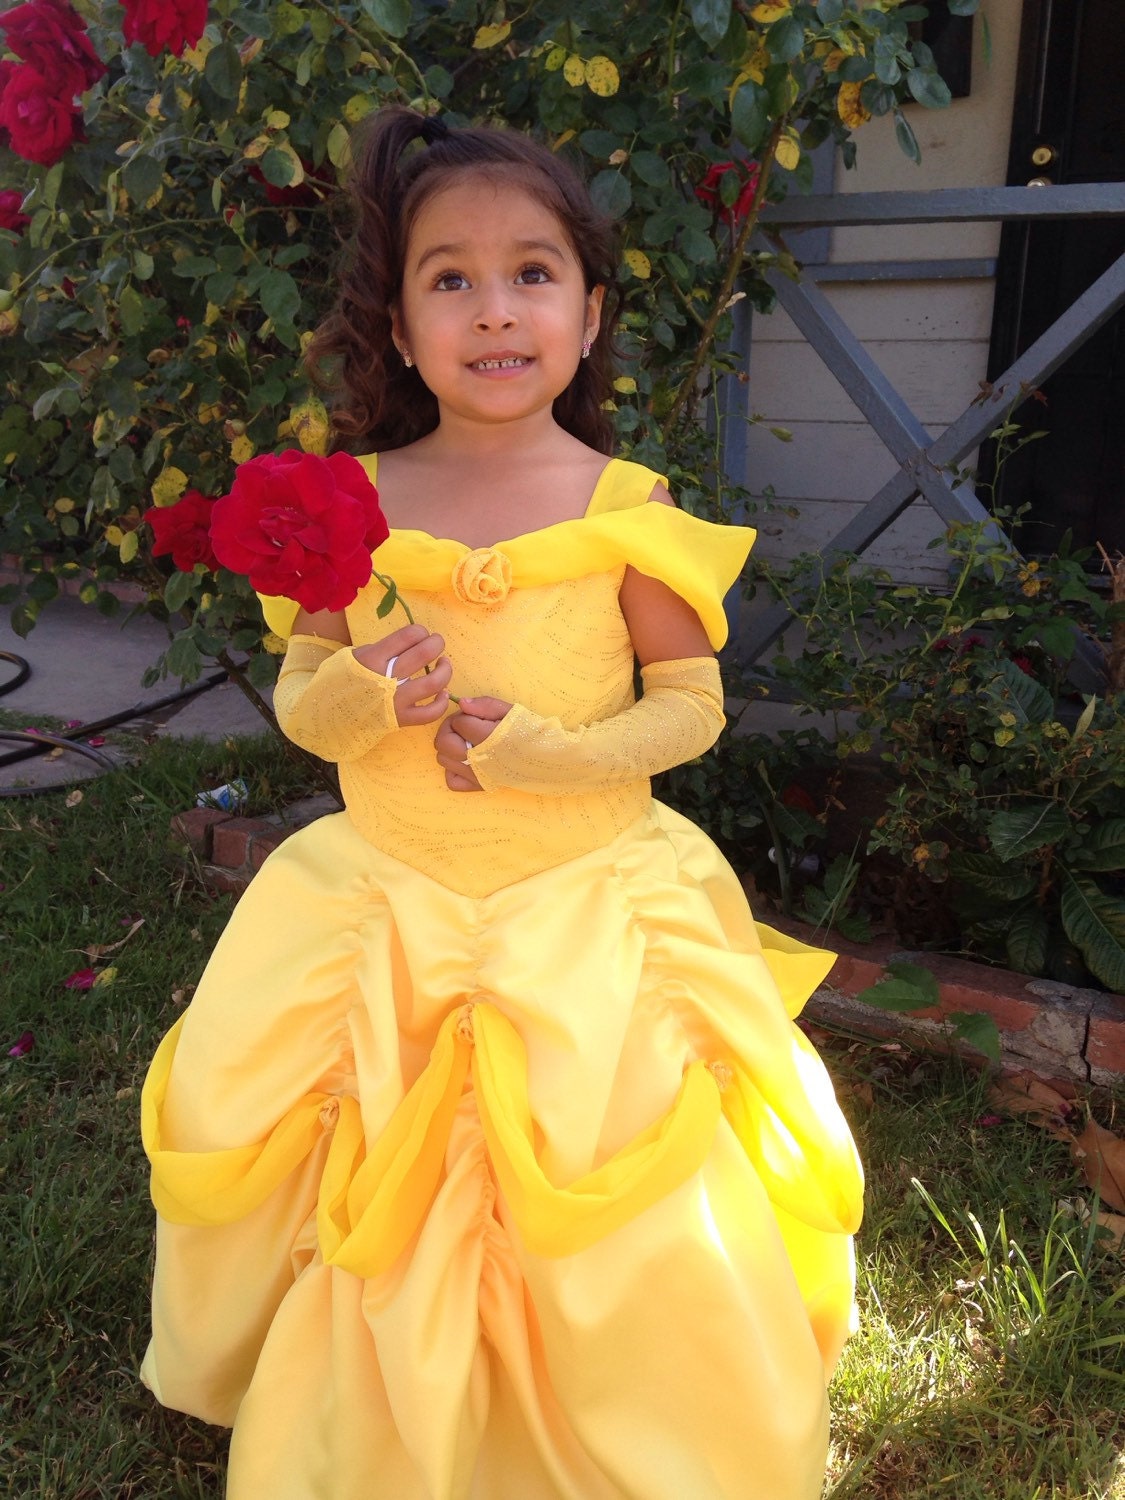 Belle Inspired Dress the Beauty and the Beast - Etsy